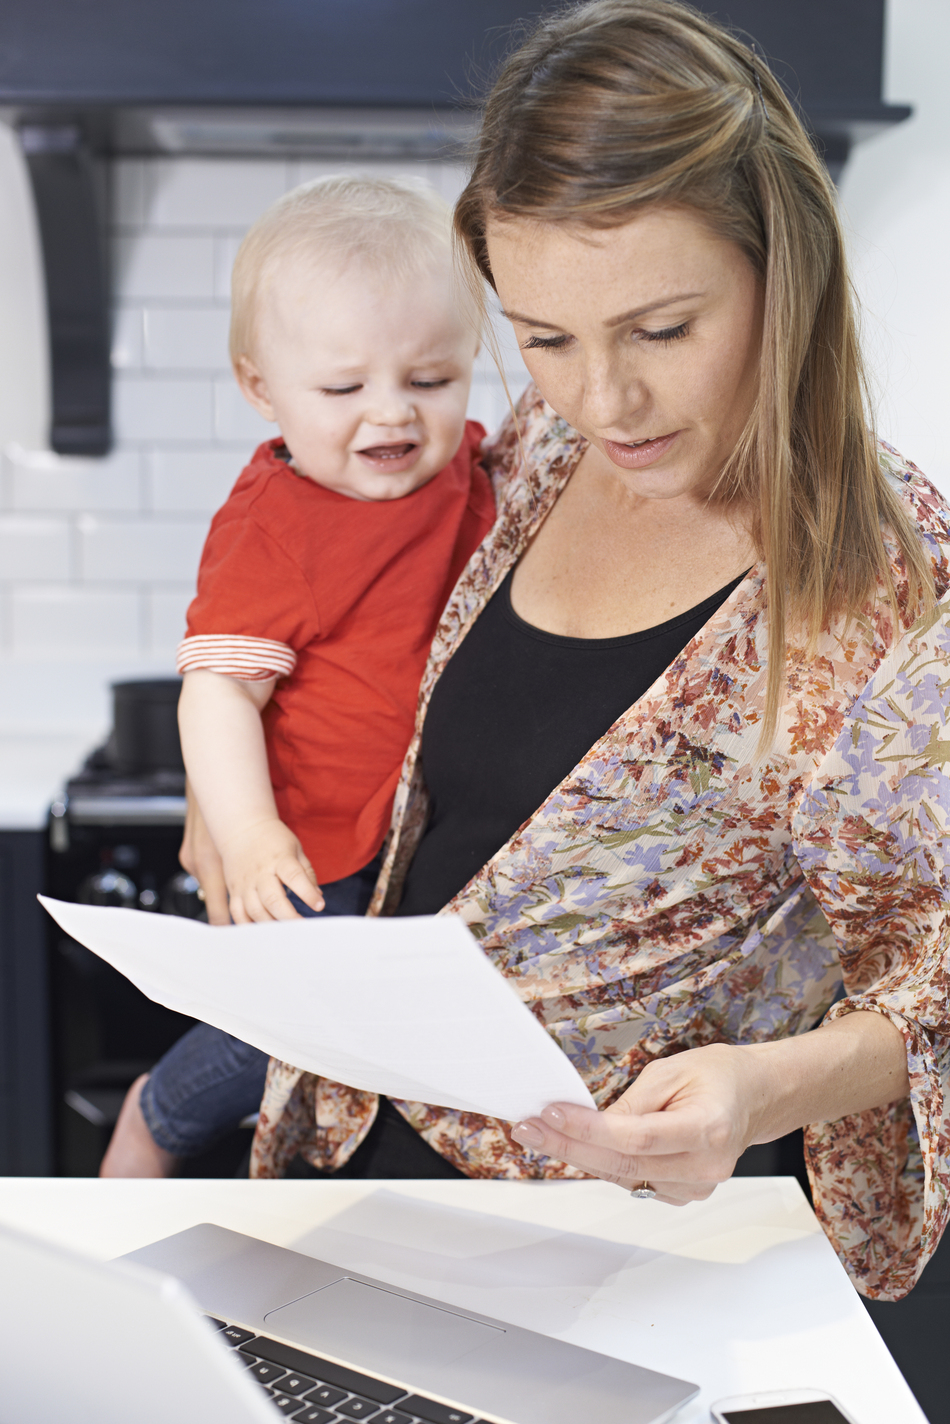 "I Thought It Was Covered?" Why You May Receive a Bill After Your Child’s Well Visit